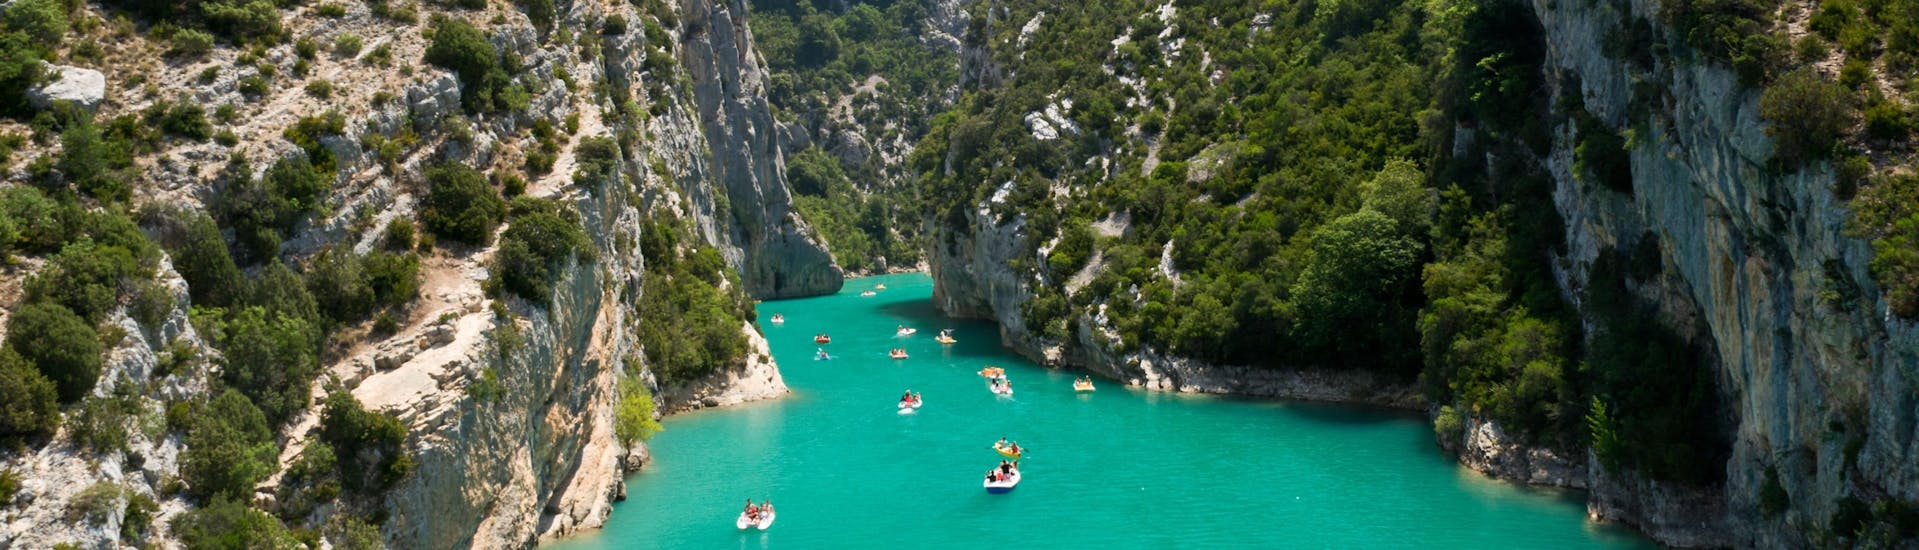 View of the Gorges du Verdon, where one can do canyoning in the Pont de Tusset canyon.